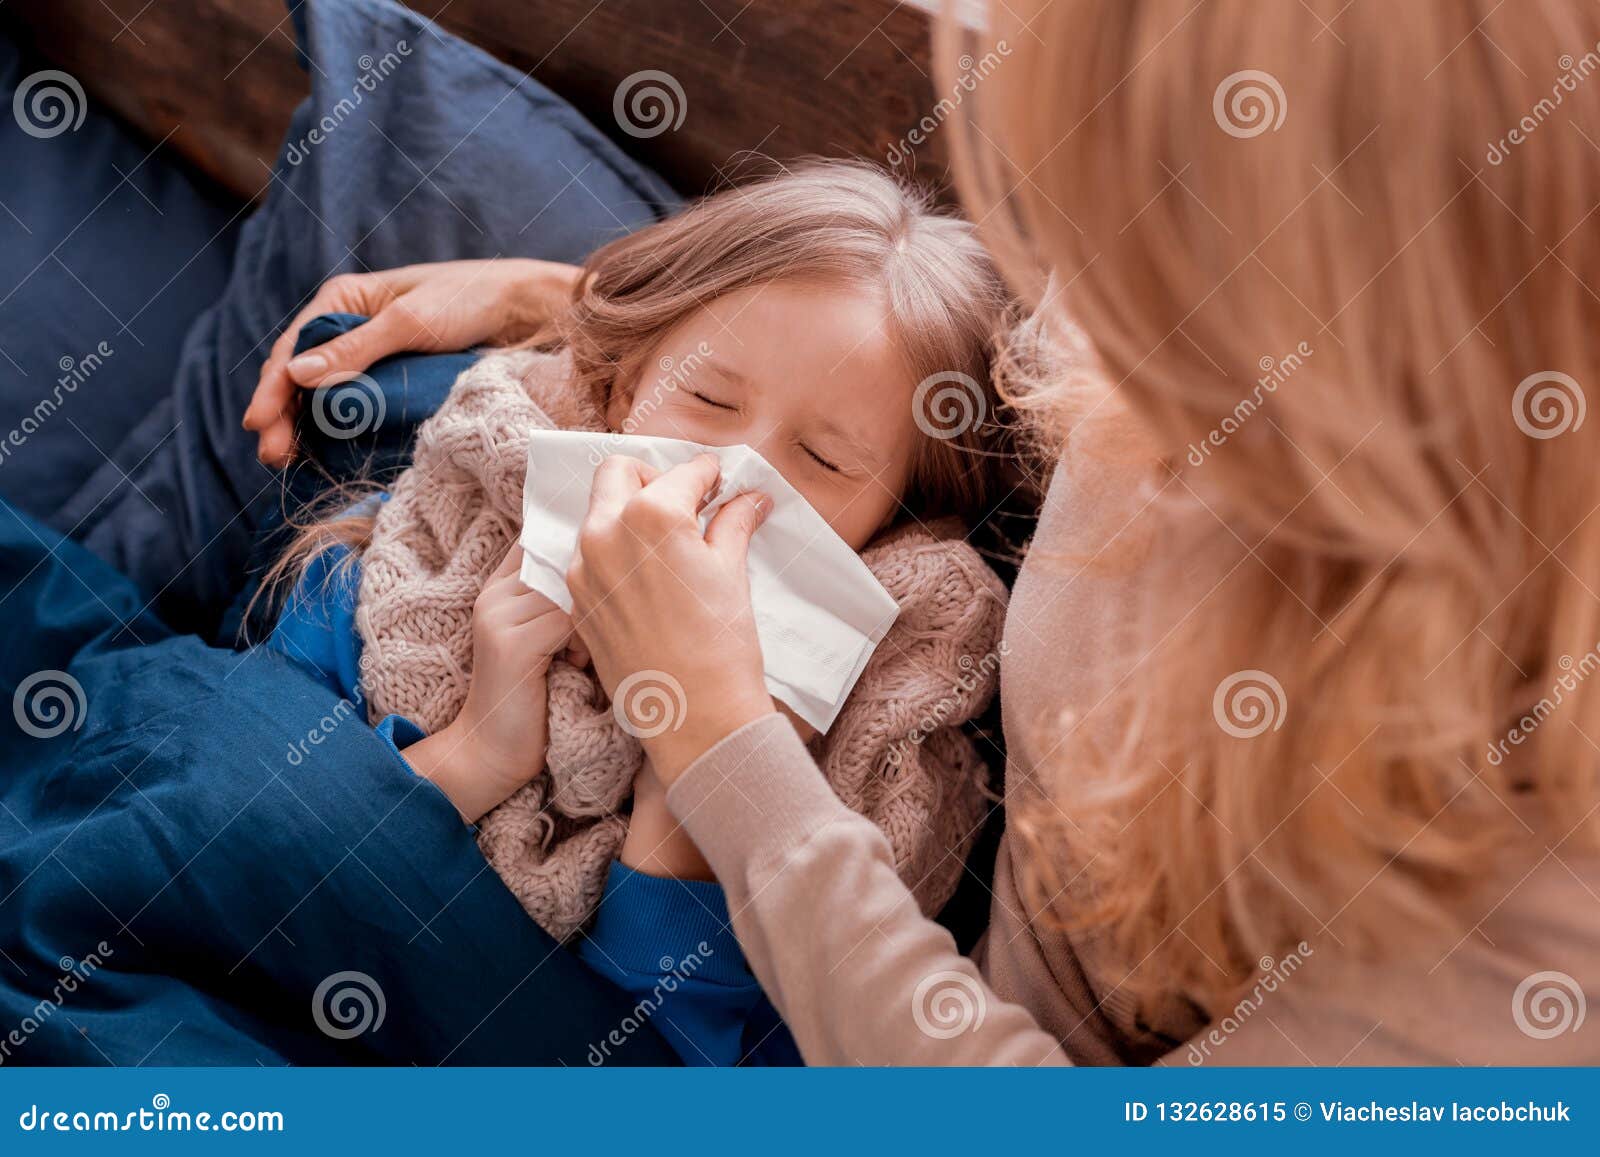 Mother Taking Care Of A Child Stock Image Image Of Comfort Love